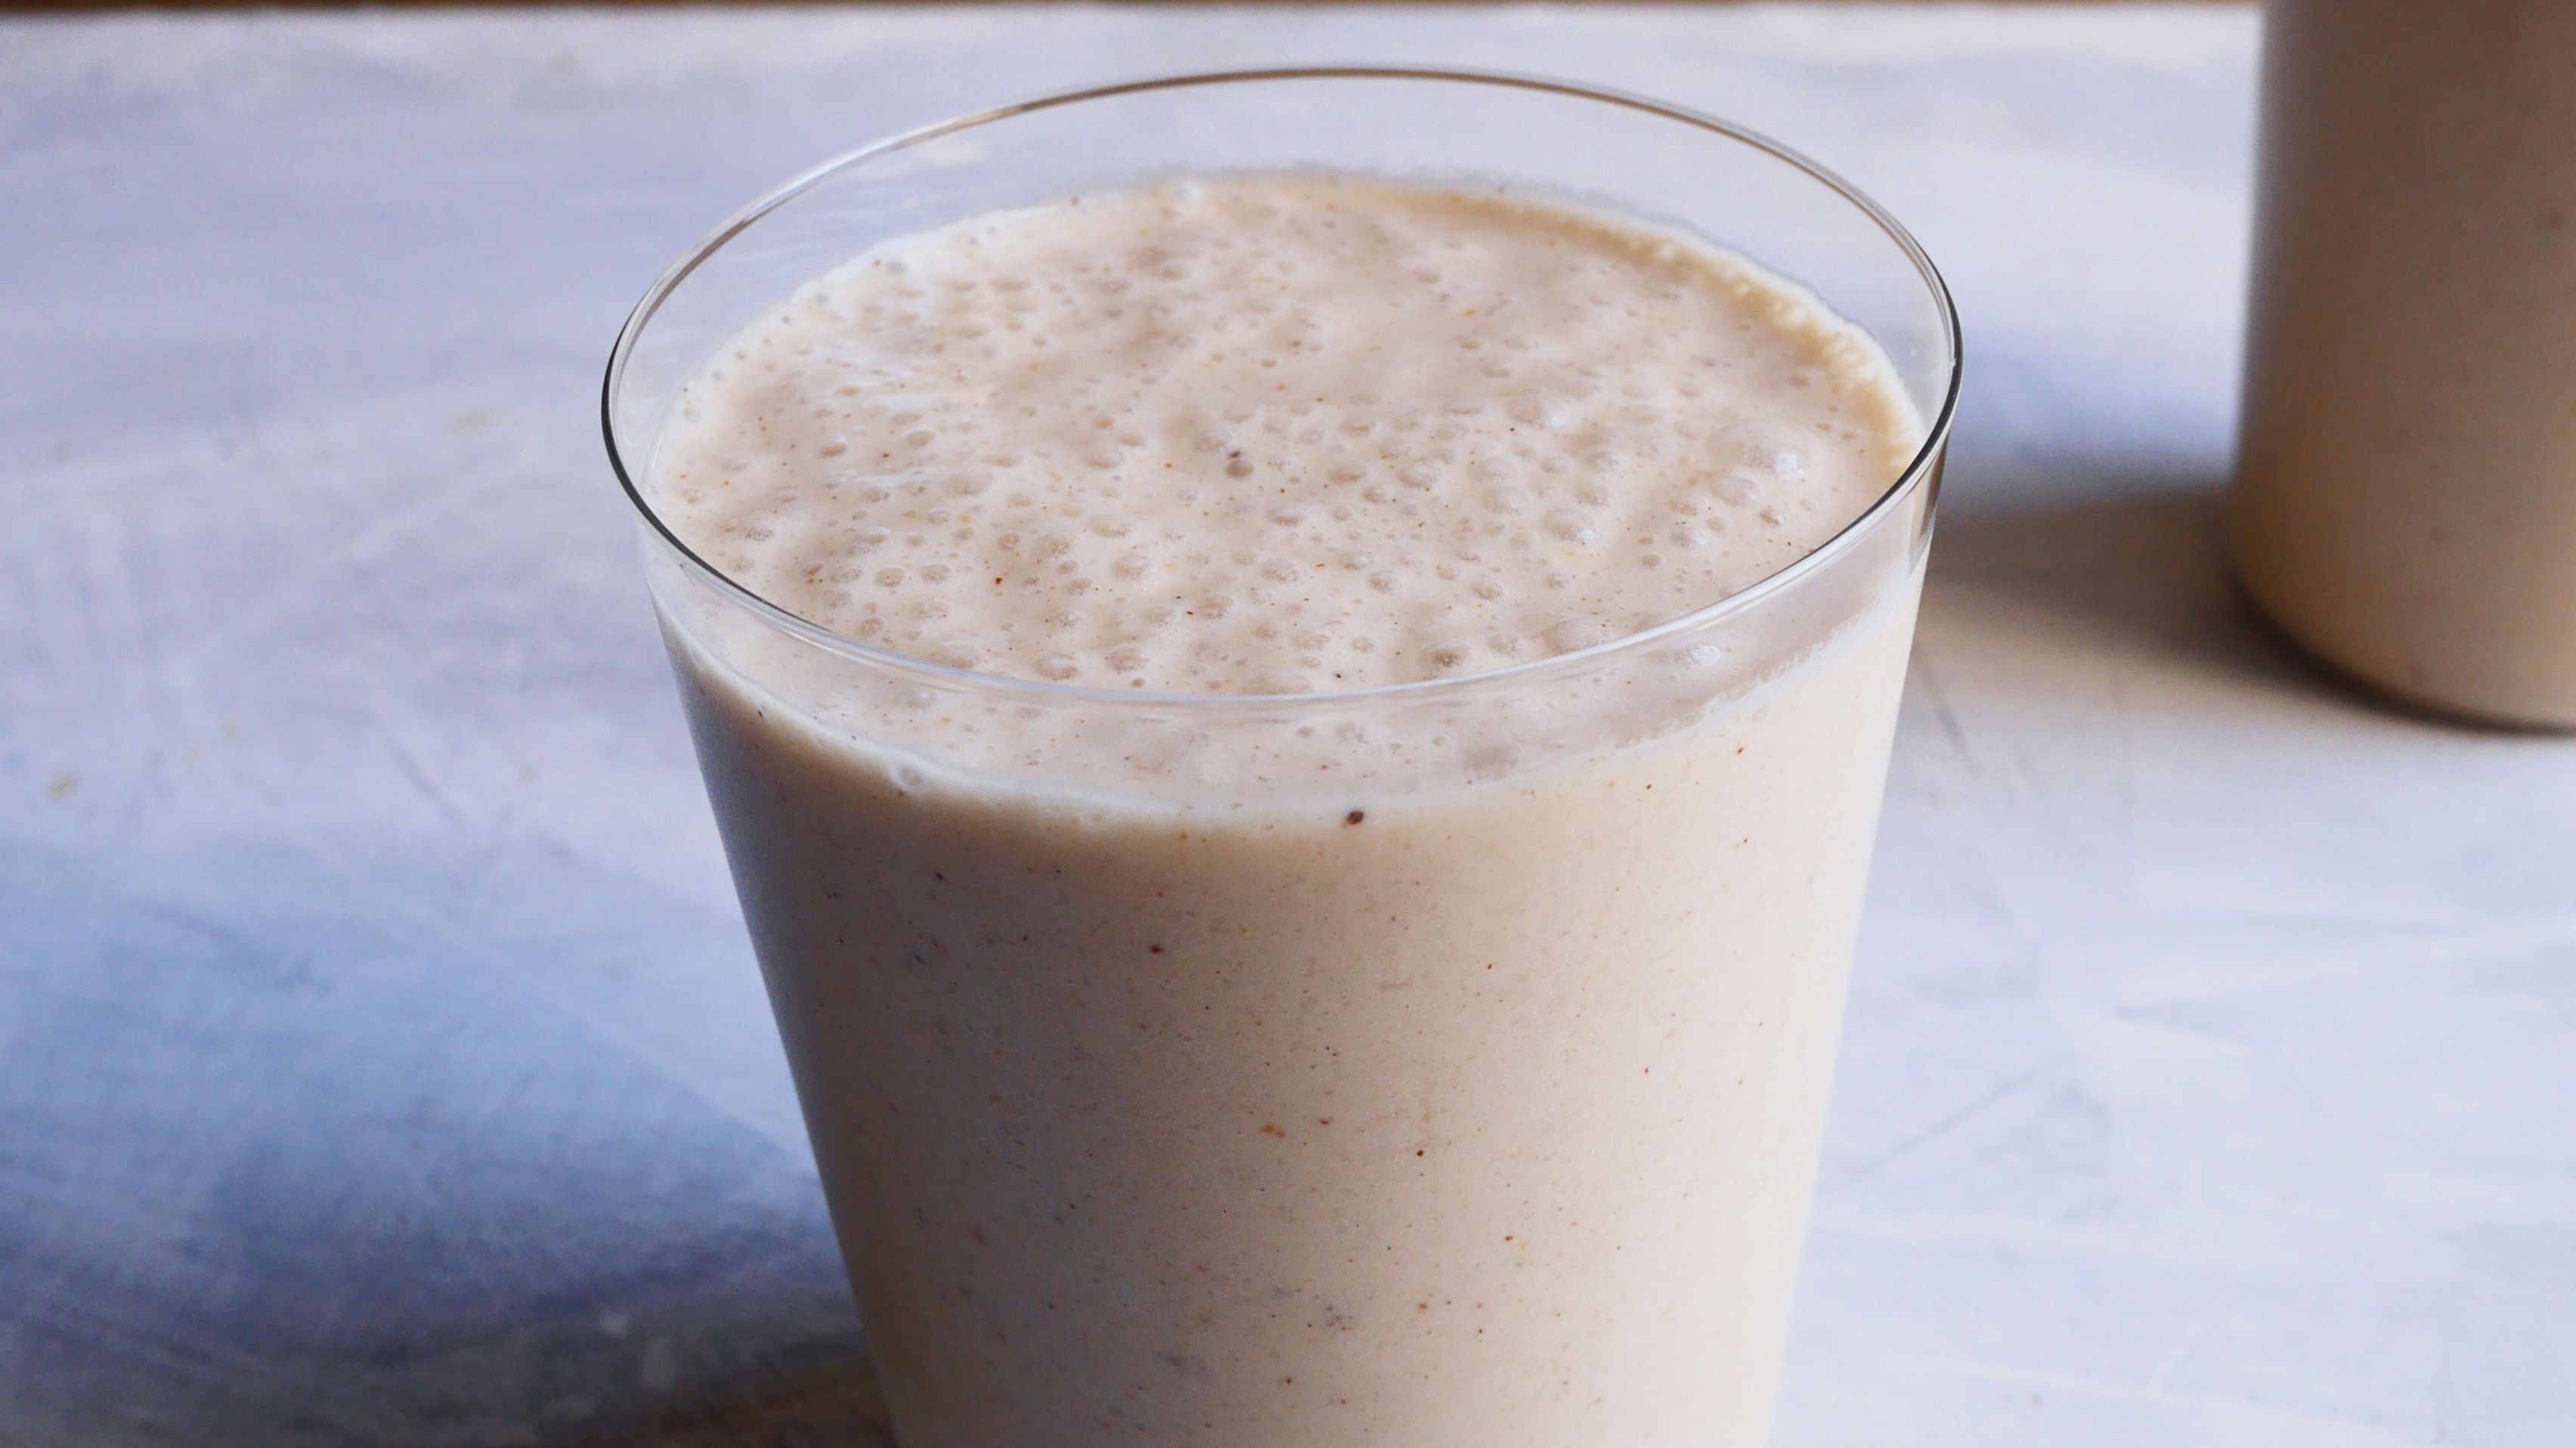 Peanut Butter Banana Smoothie Recipe - How To Make Healthy PB Smoothie